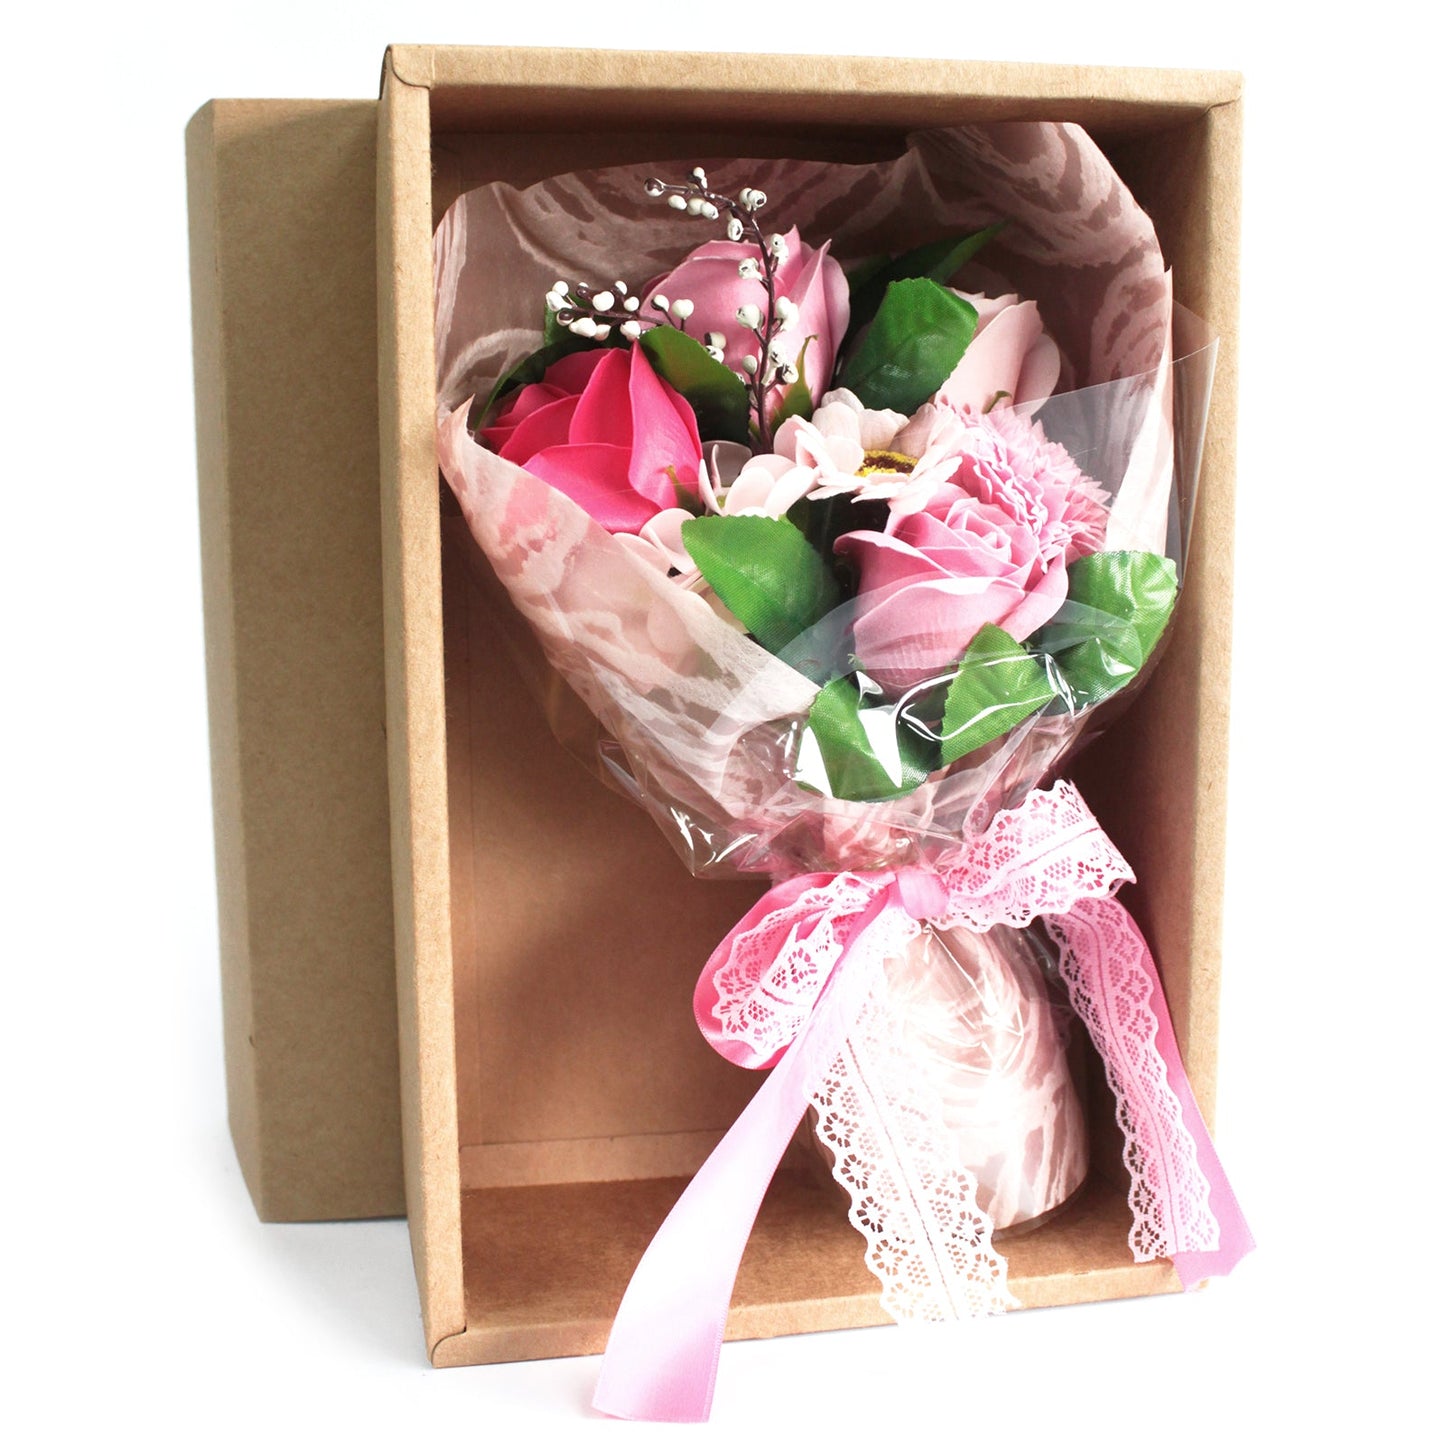 Flower Soap Bouquet - Gift Boxed Soap Flowers Soul Inspired Pink 